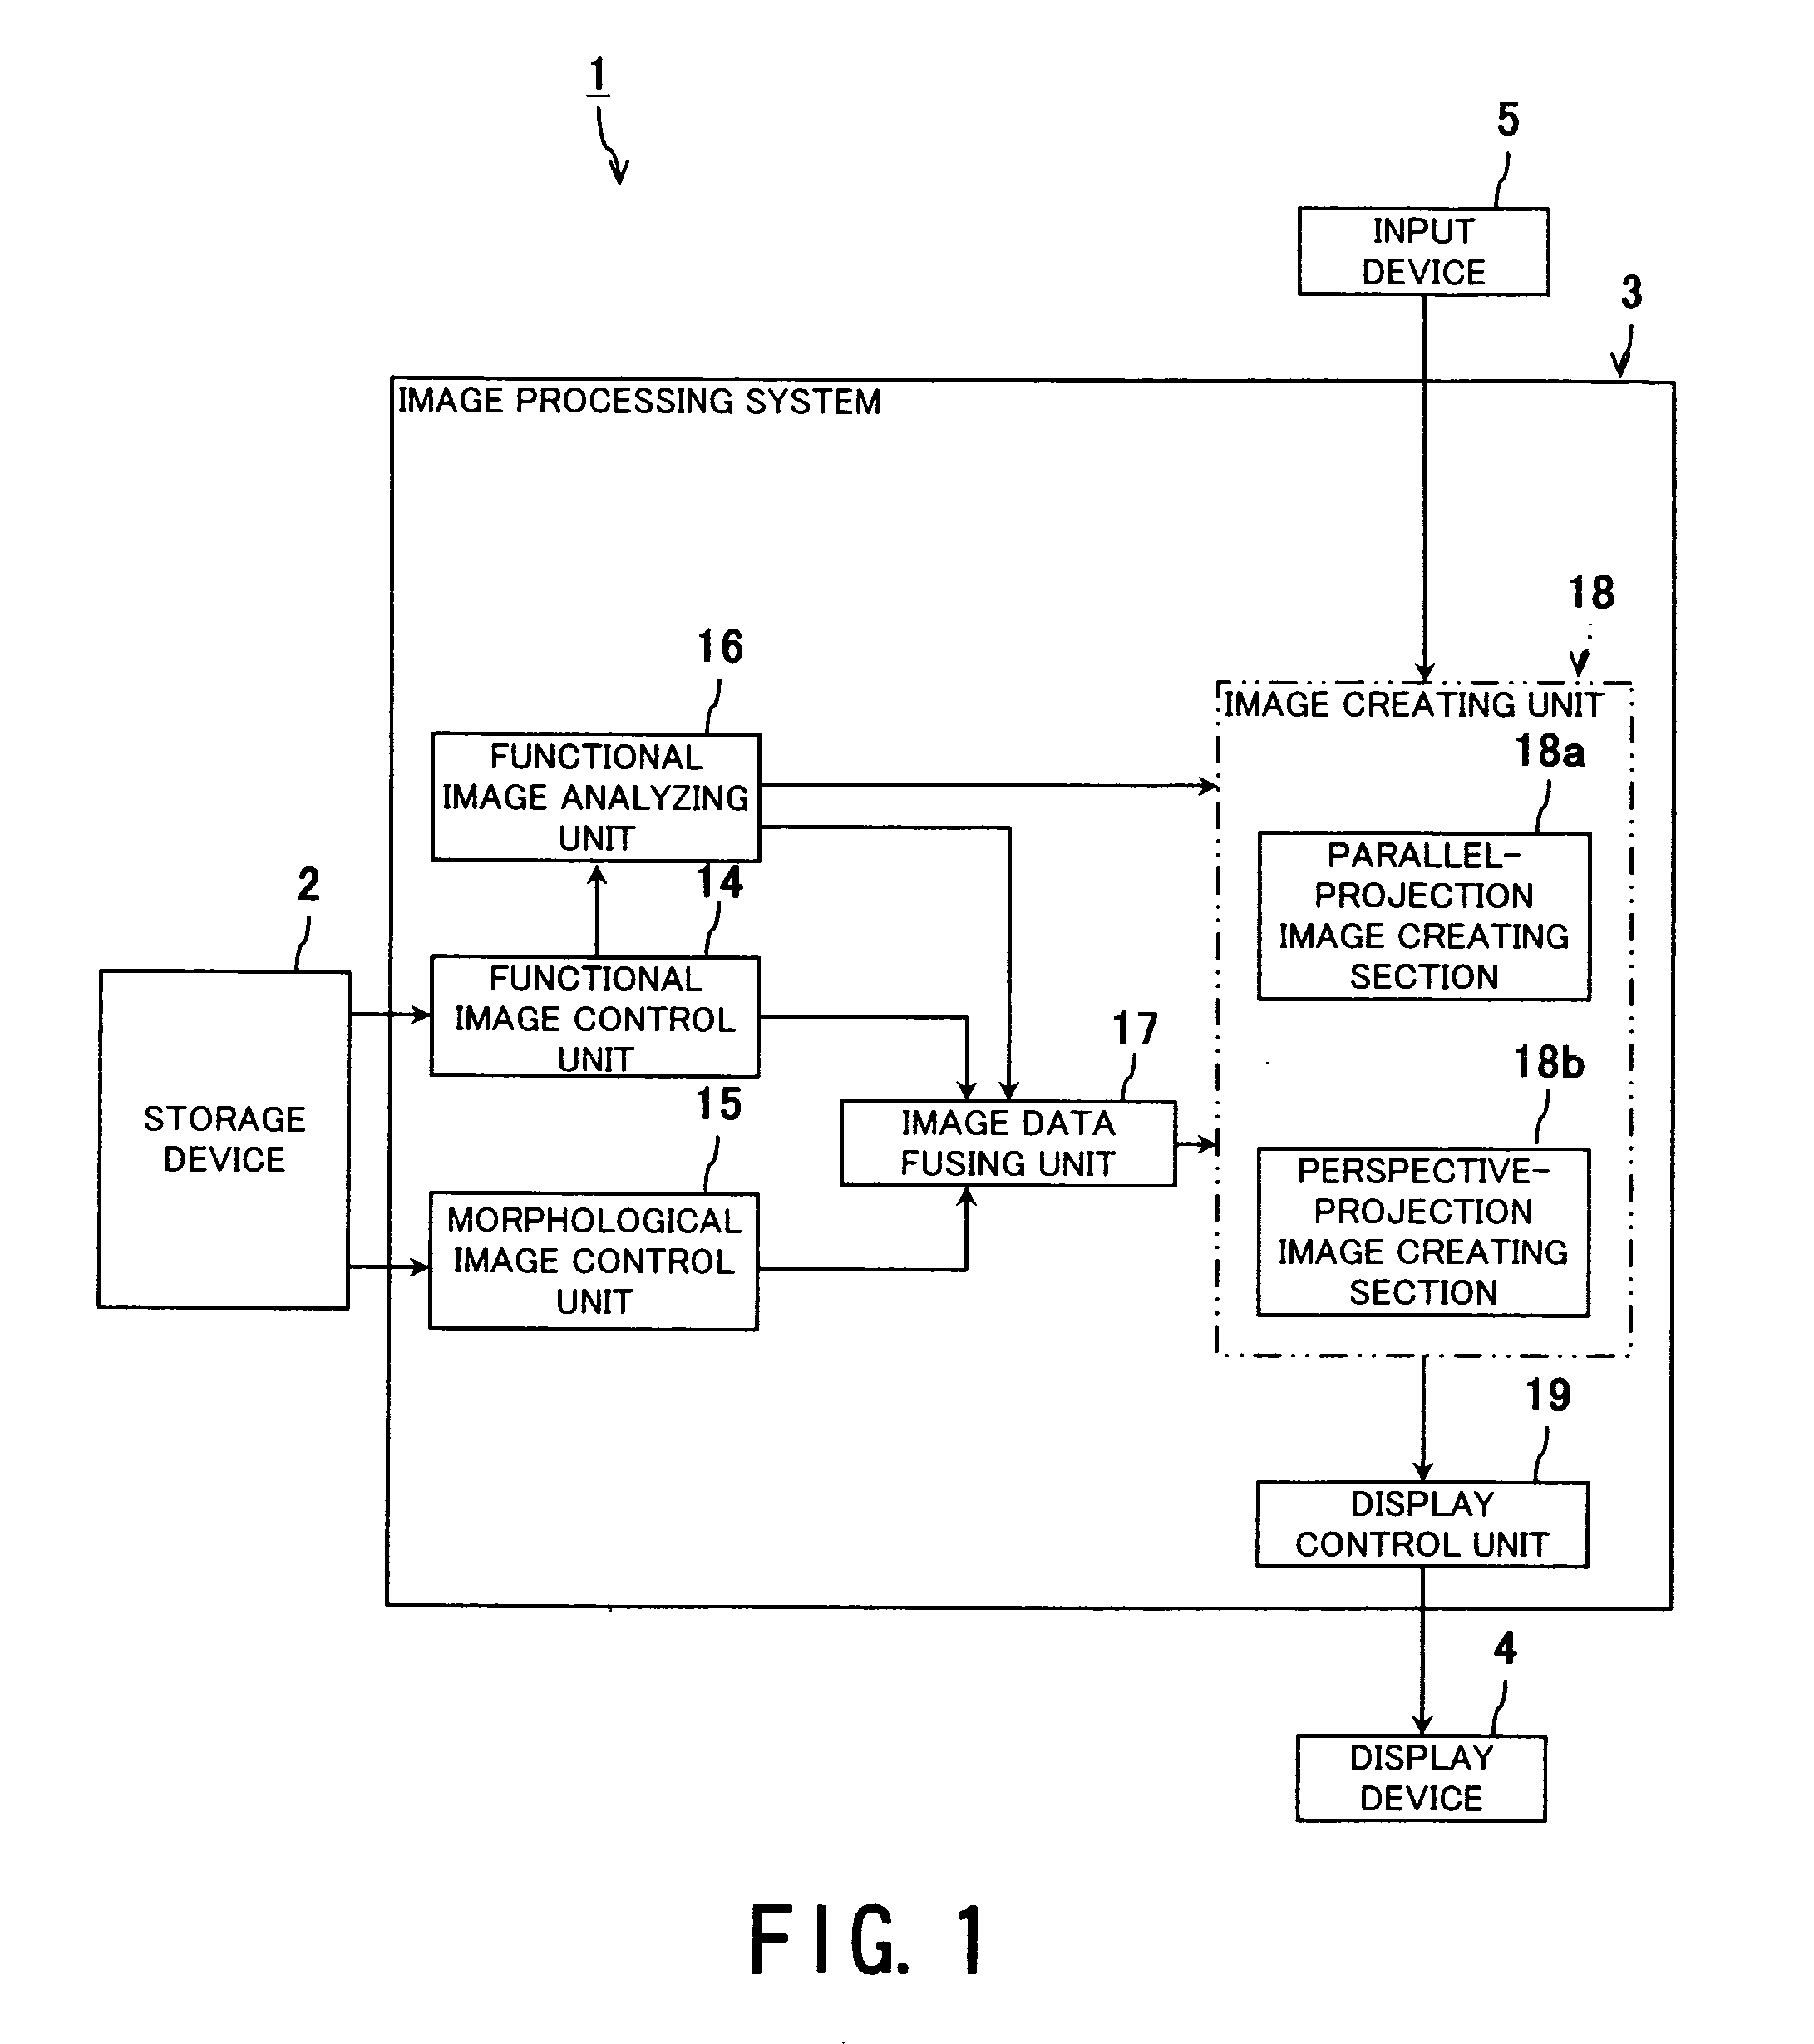 Diagnostic imaging system and image processing system